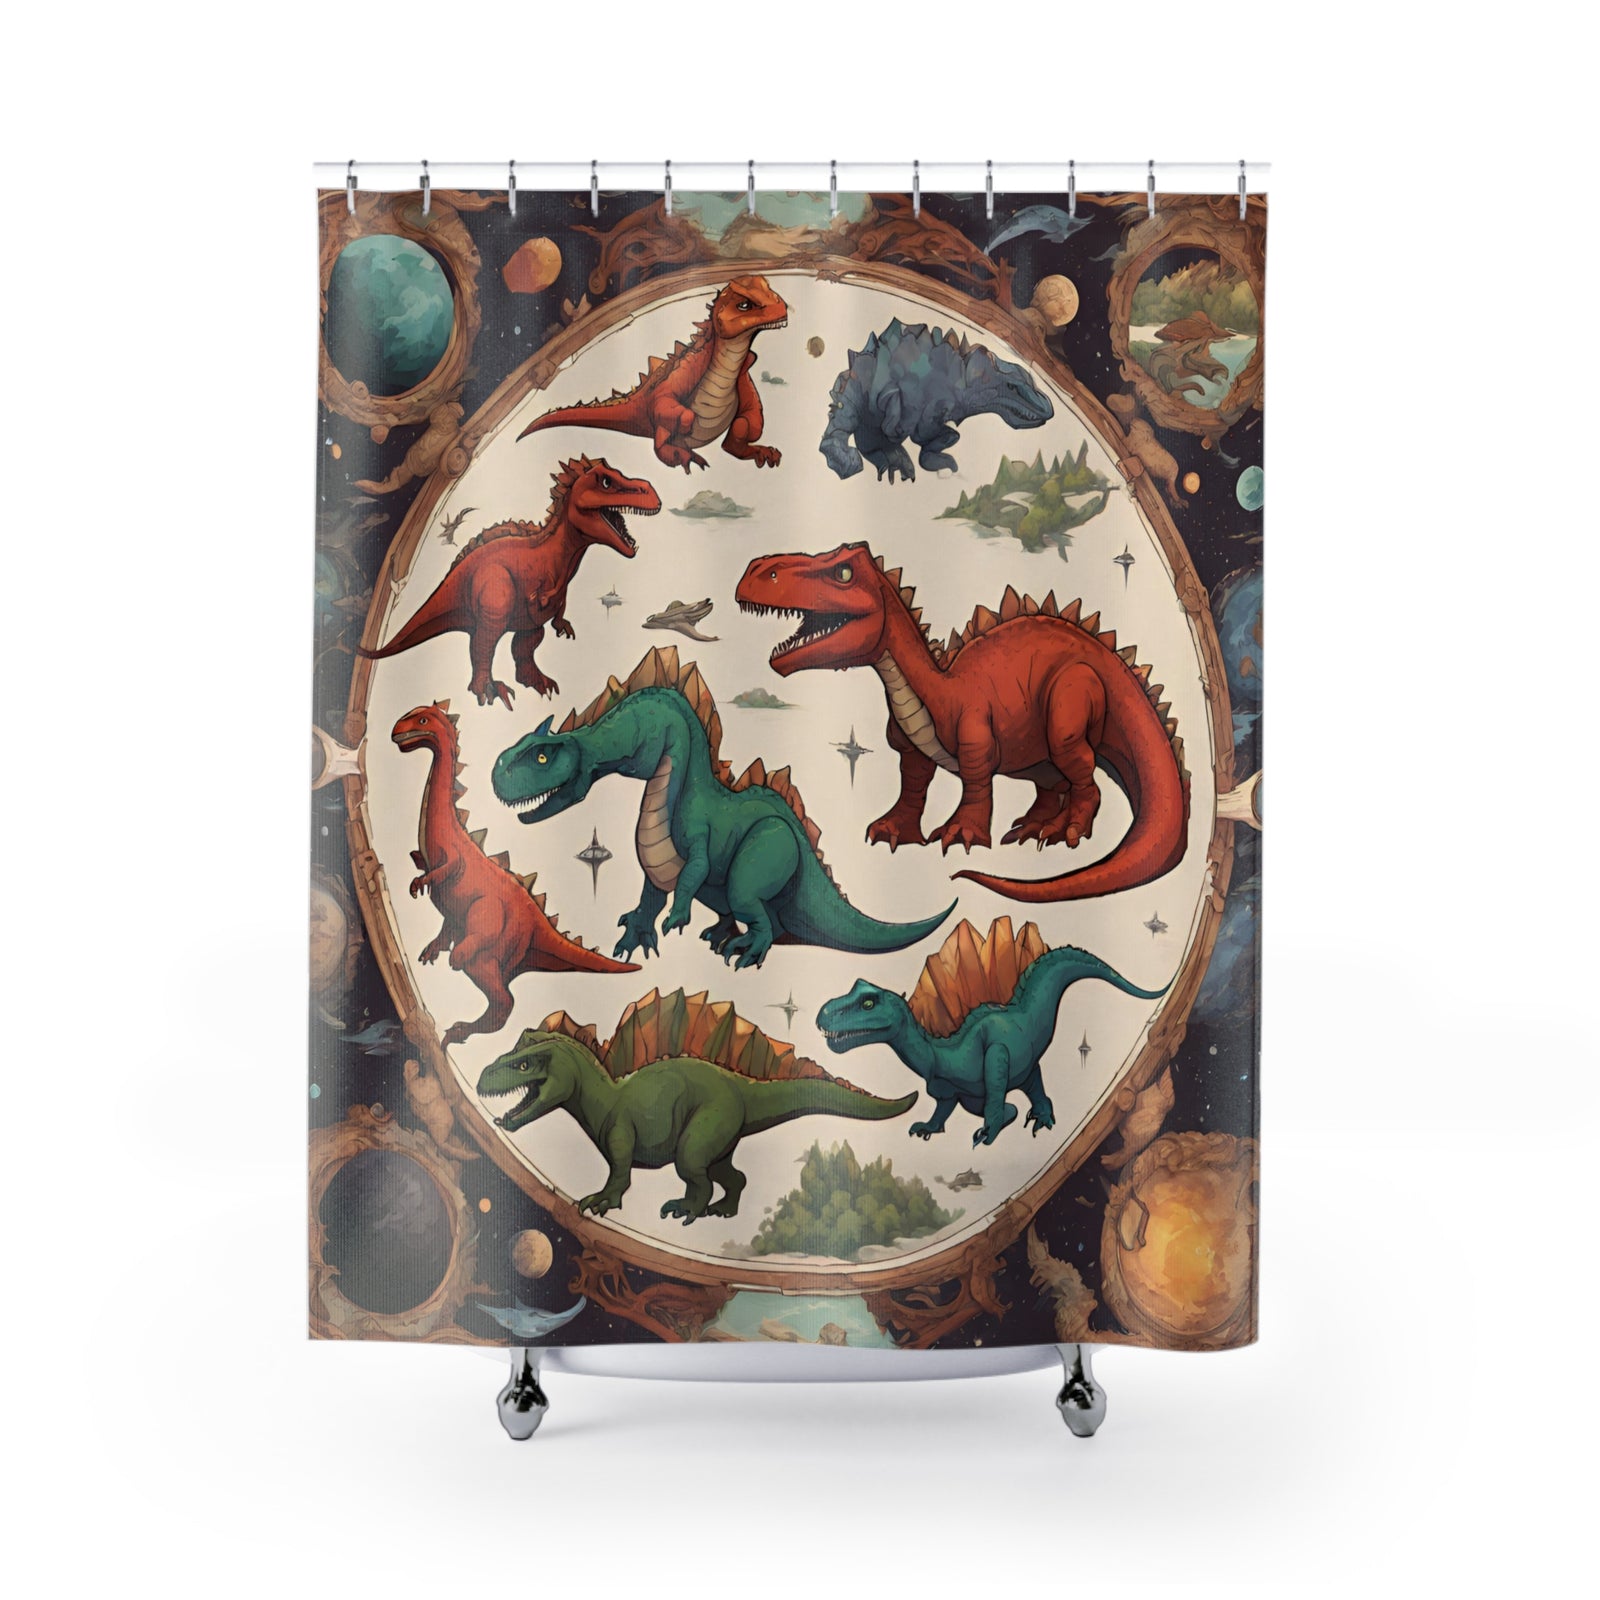 Dinosaur-Inspired Shower Curtains: Trendy and Cool Designs for Kids' Bathrooms - Transform Bath Time with Our Latest Collection!